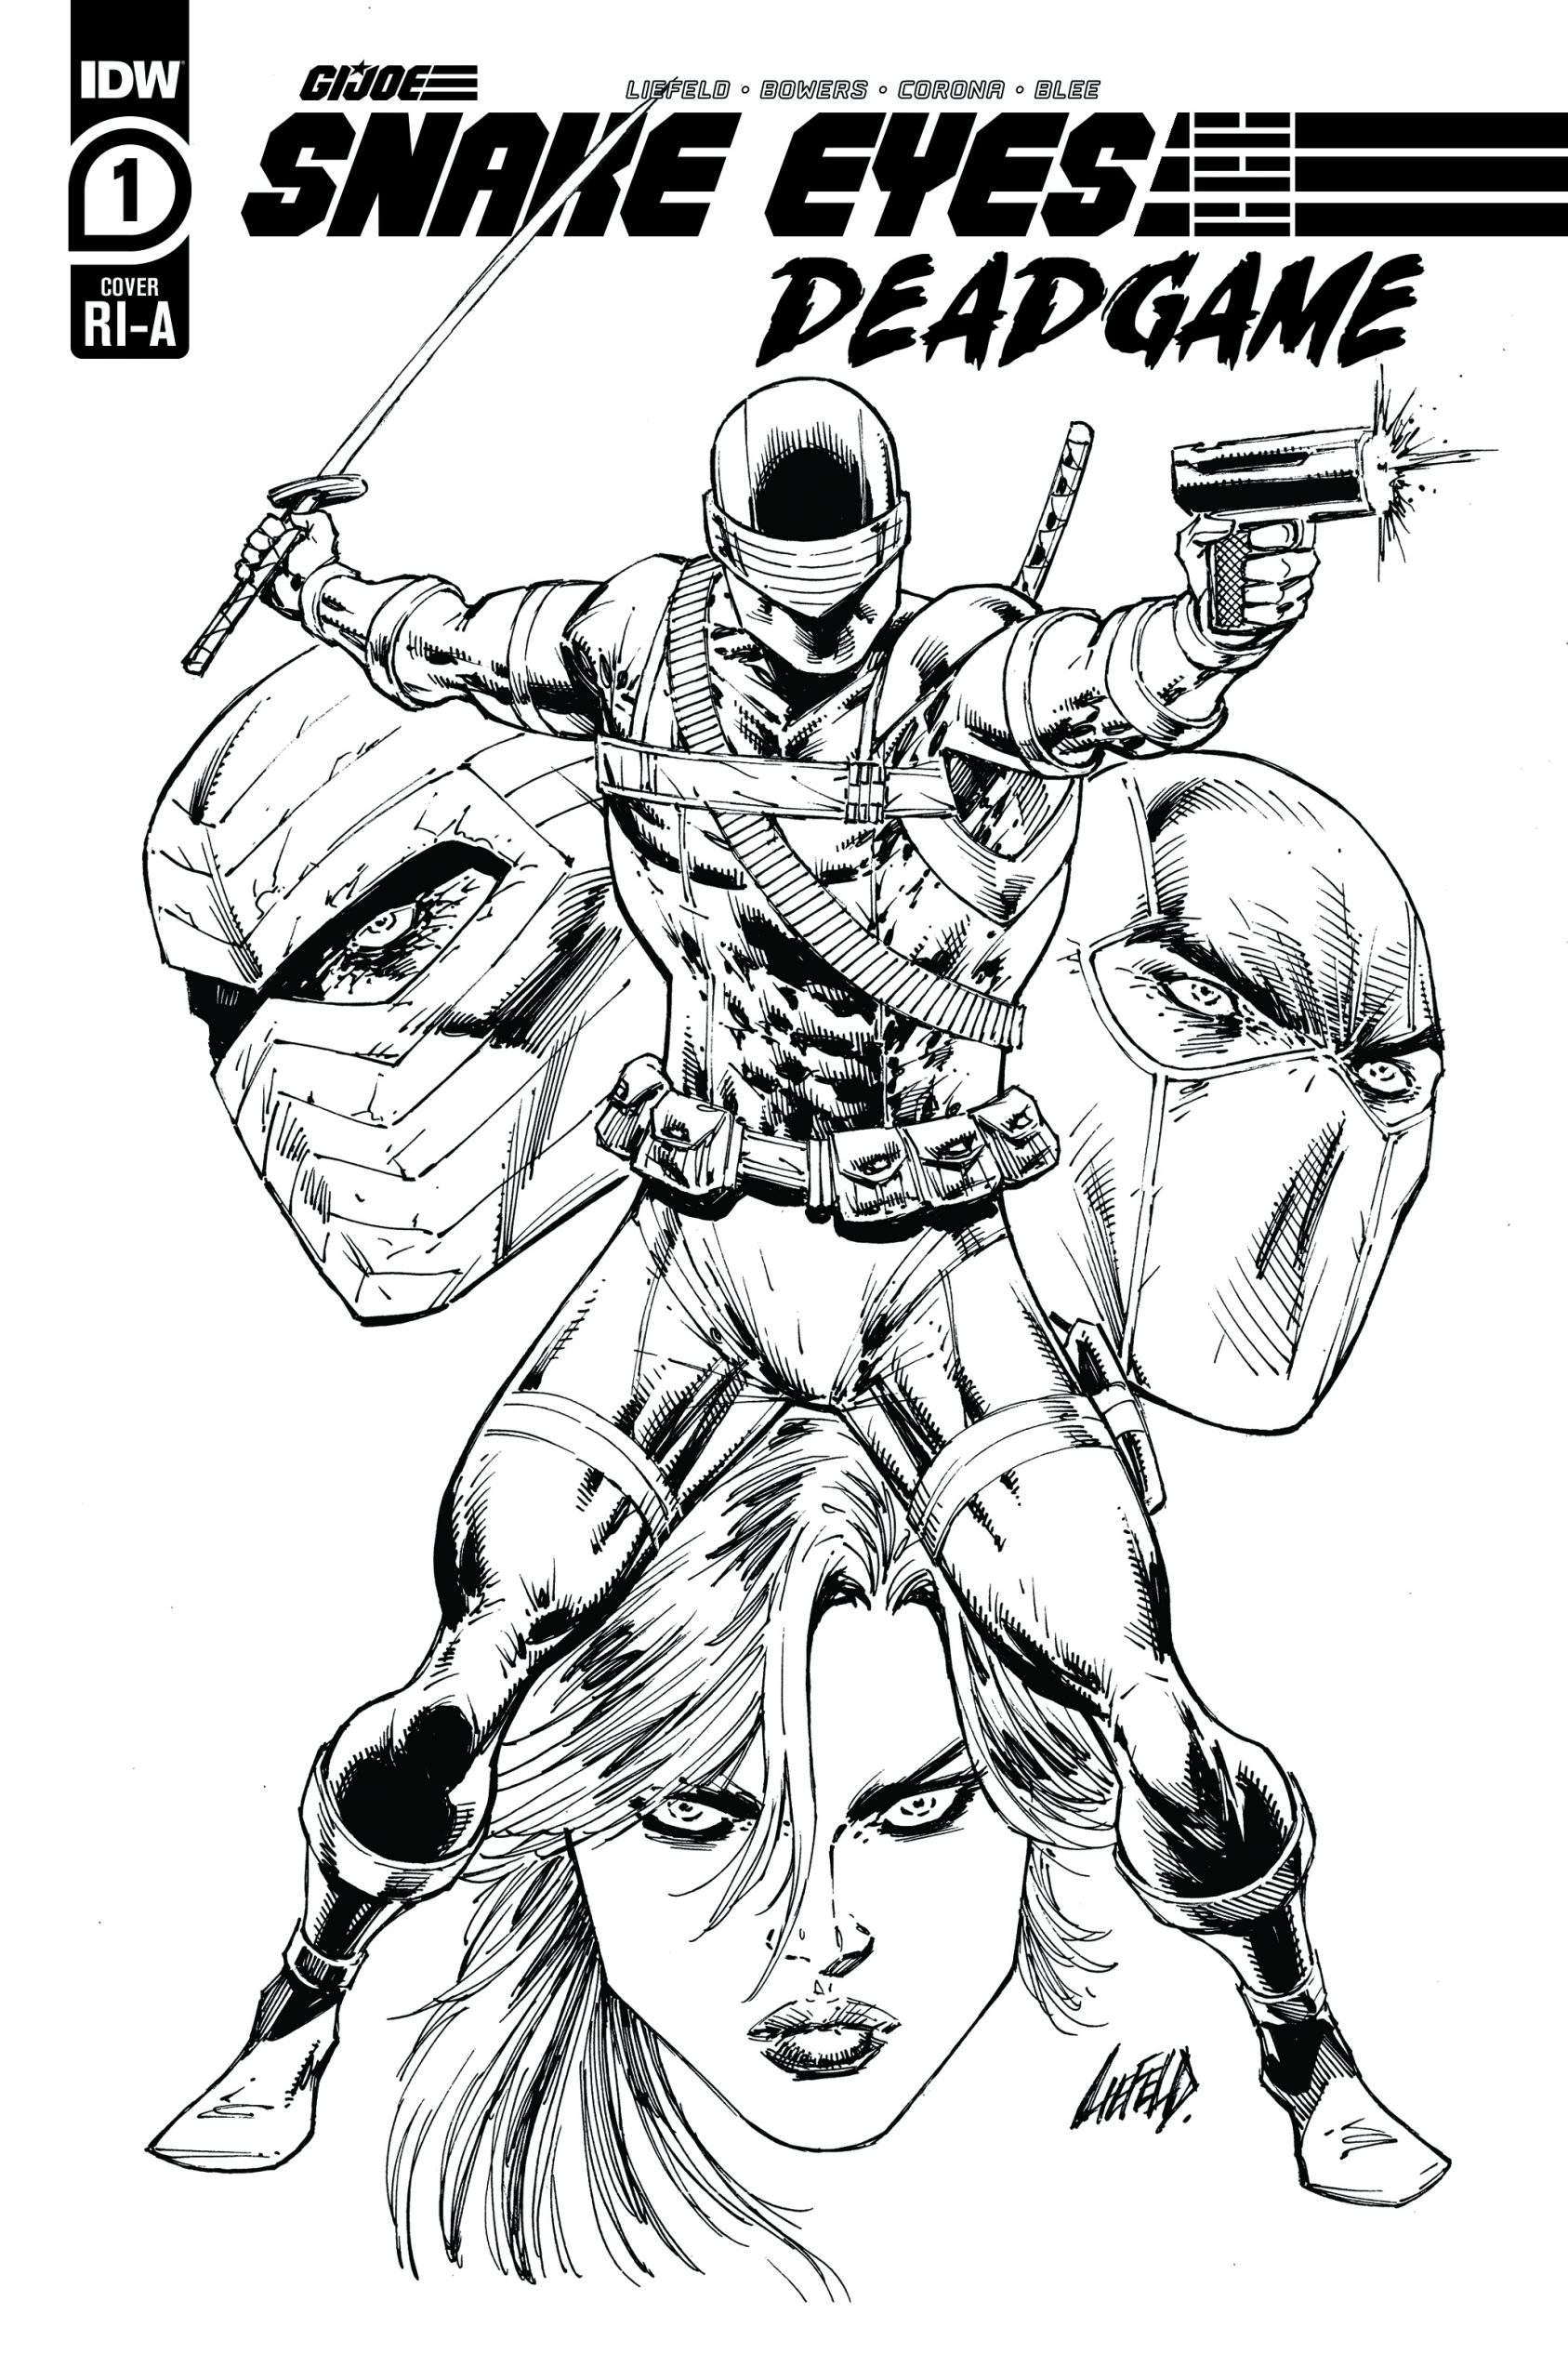 Snakes Eyes Deadgame #1 Cover RI-B by Rob Liefeld